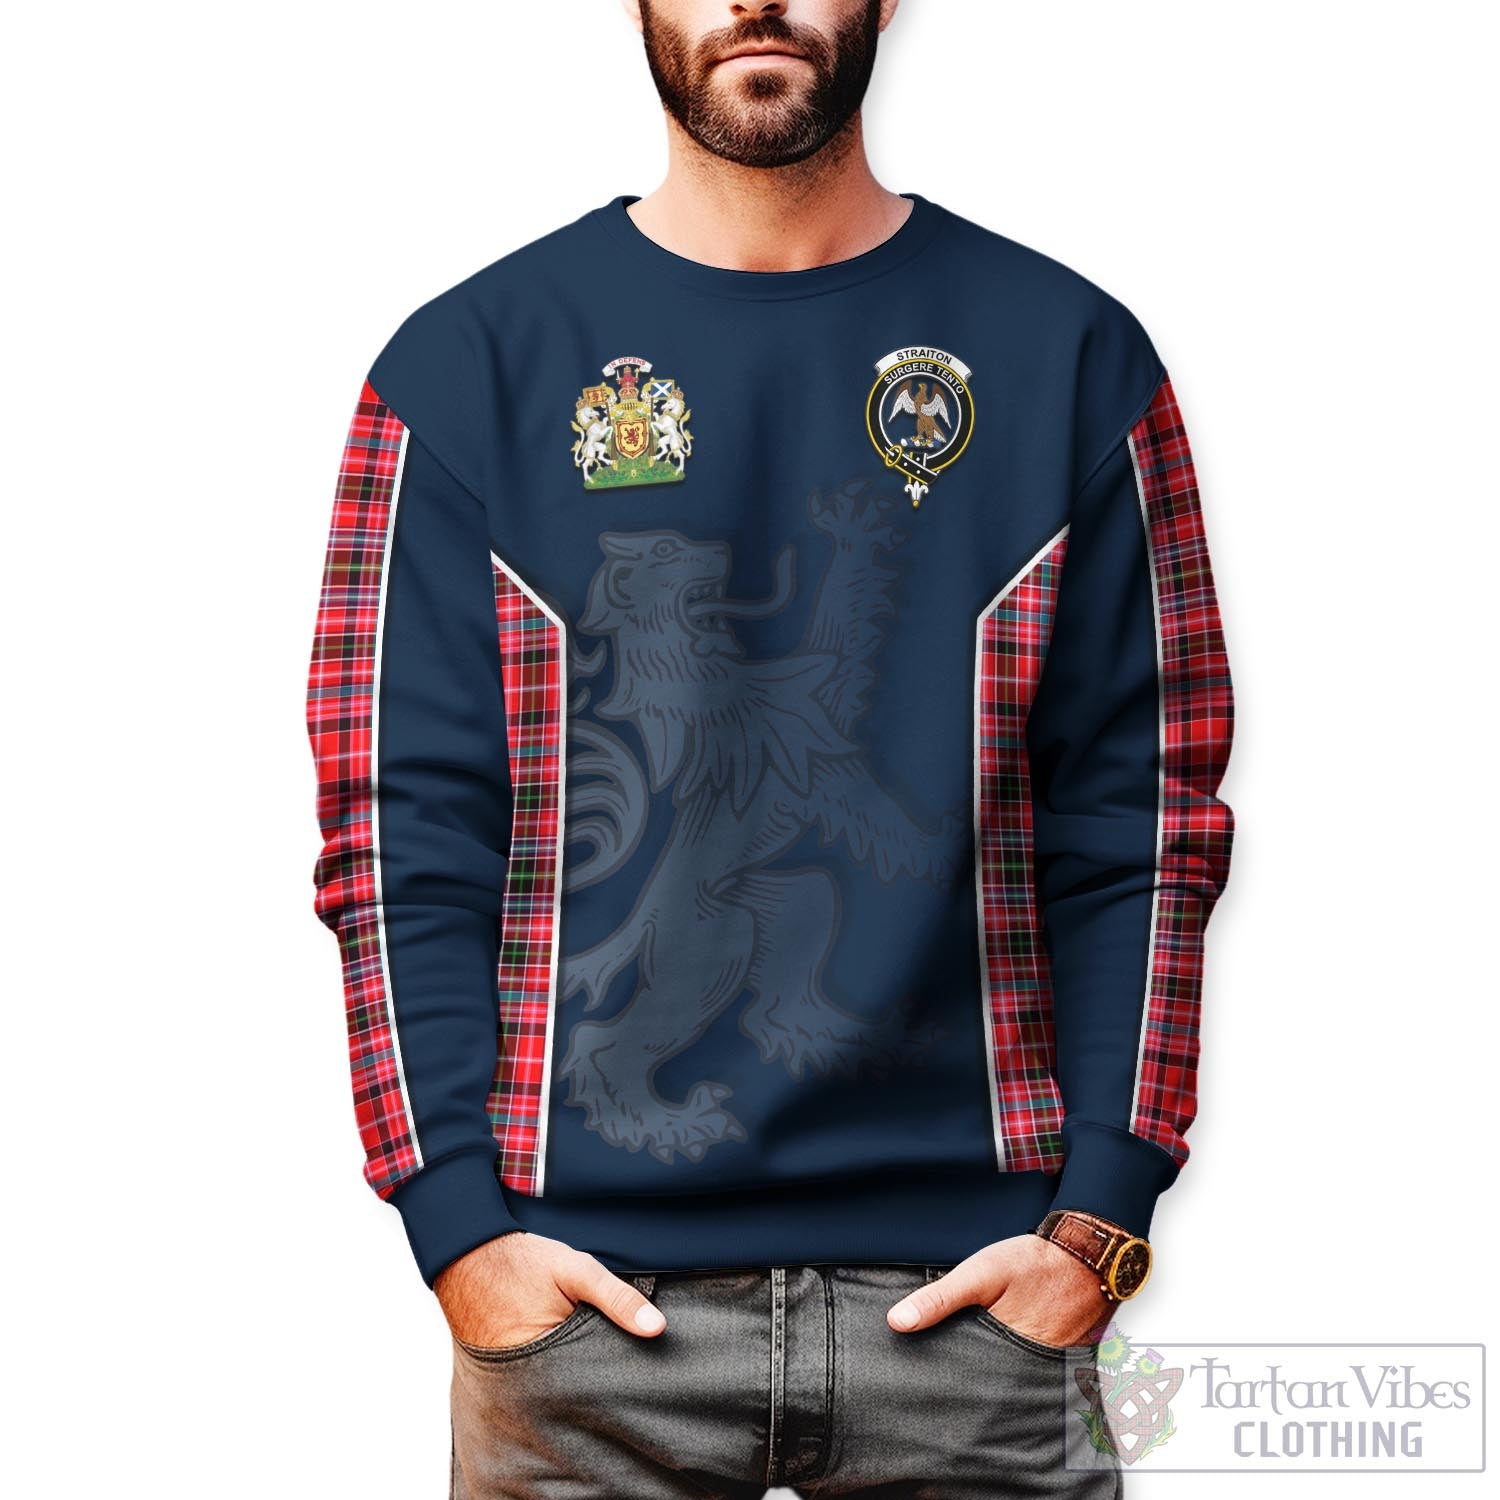 Tartan Vibes Clothing Straiton Tartan Sweater with Family Crest and Lion Rampant Vibes Sport Style